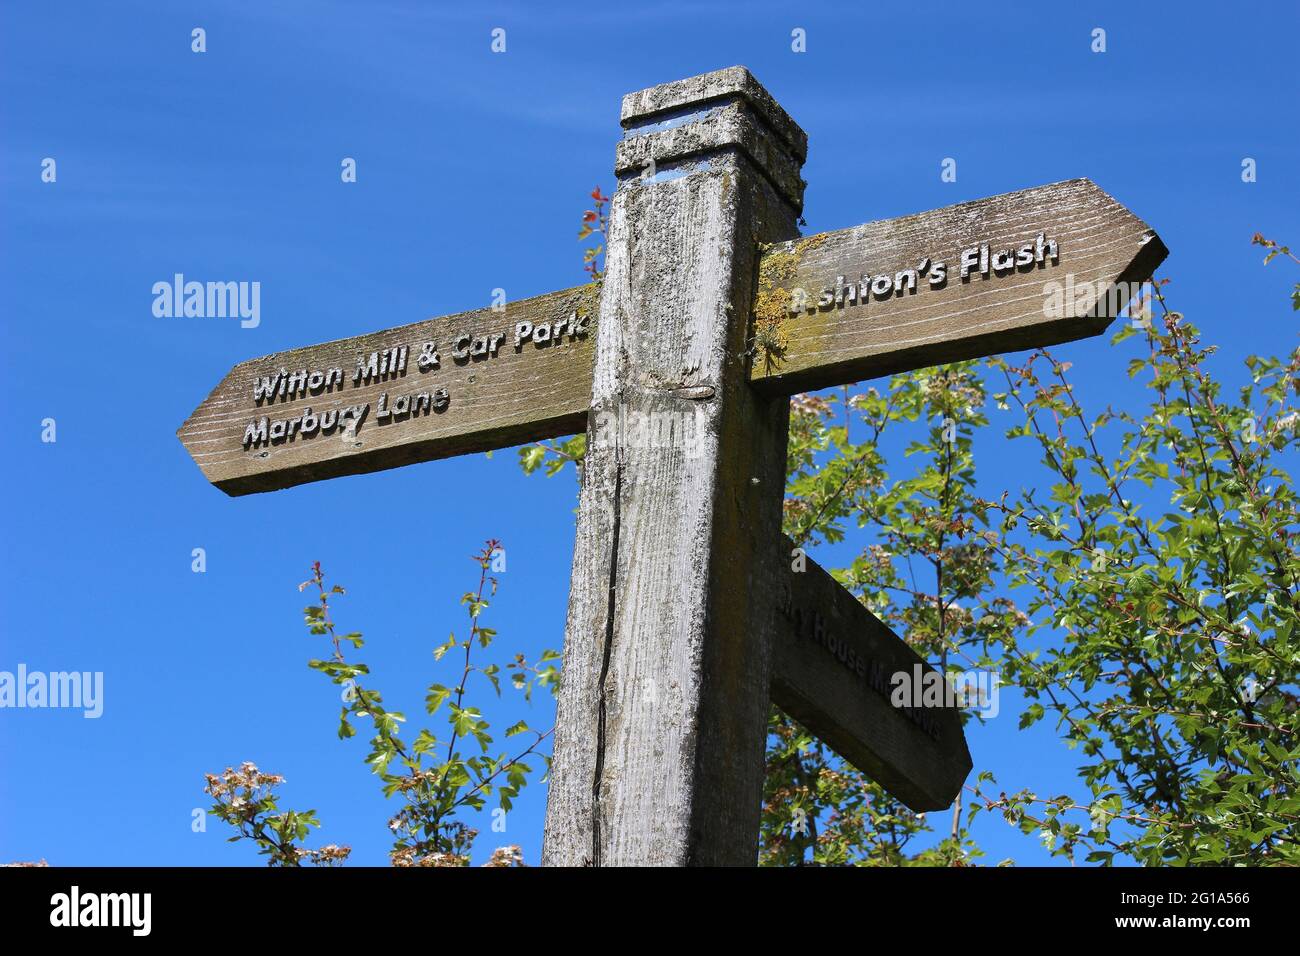 Signpost In Northwich Woodlands, Cheshire, UK Stock Photo